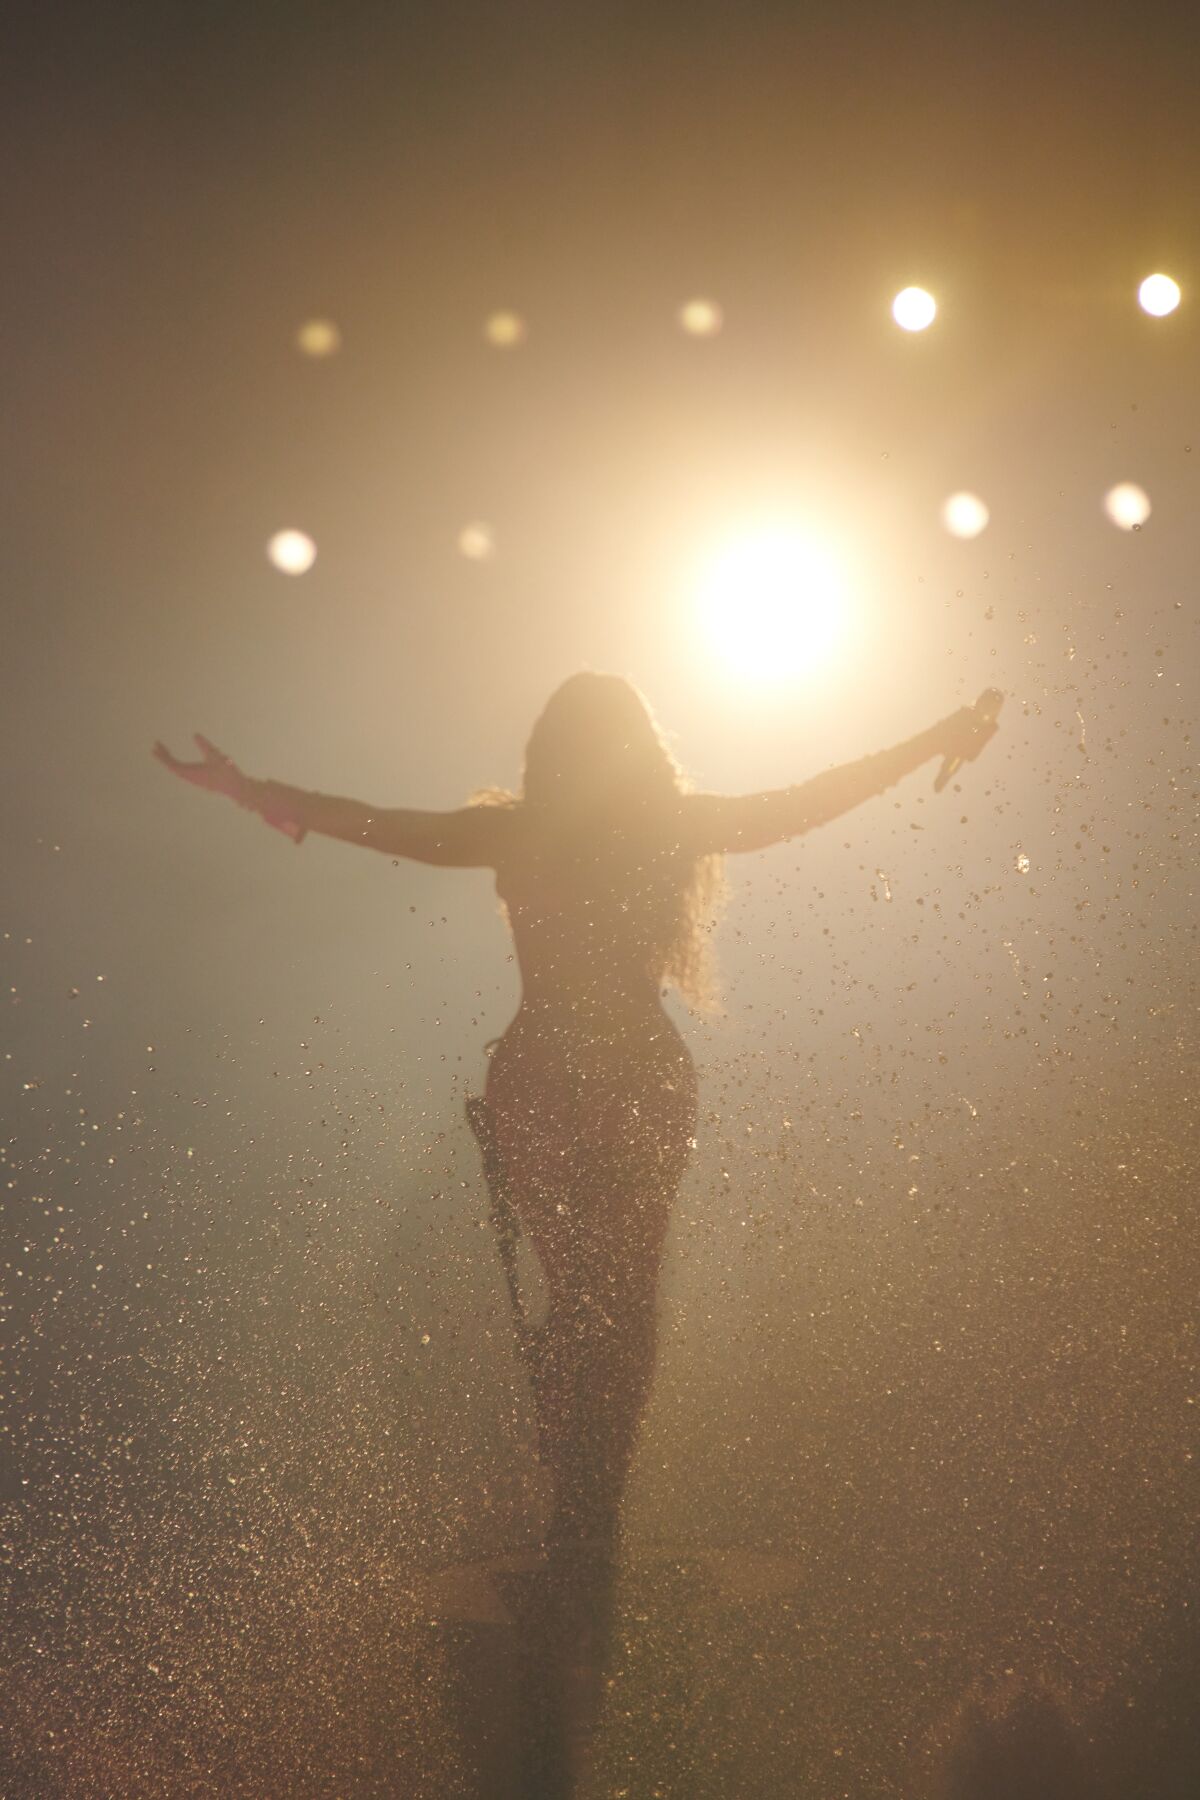 Silhouette of a woman with arms open in front of stage lights